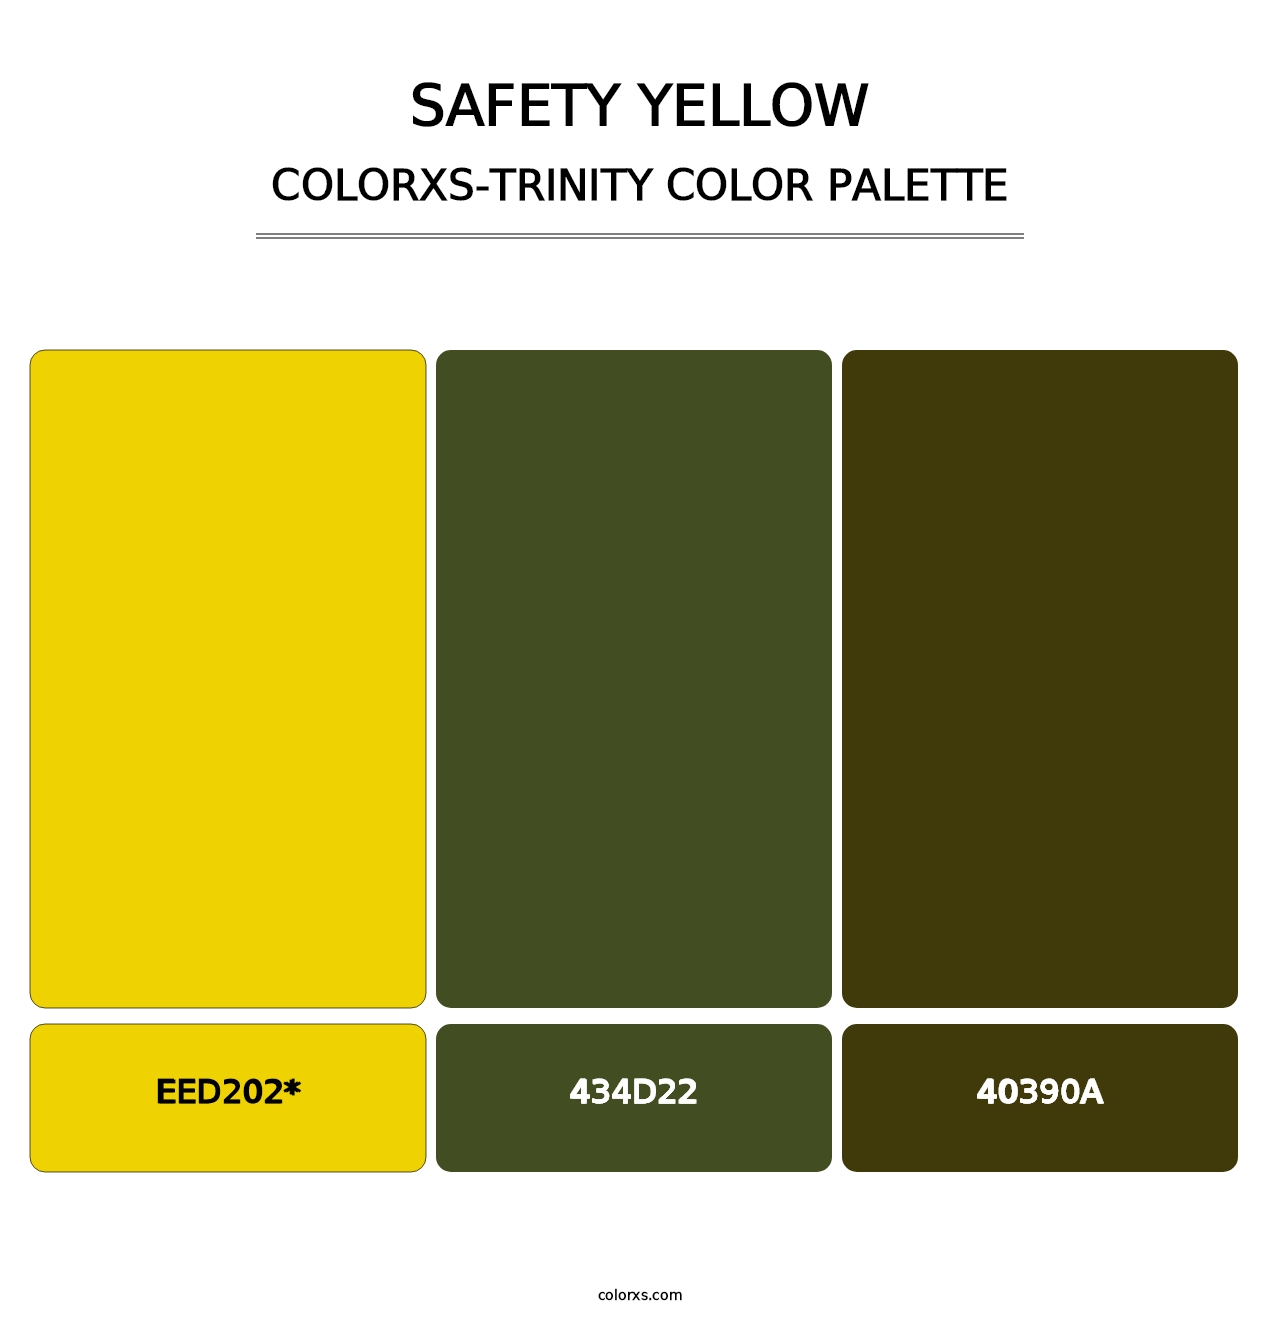 Safety Yellow - Colorxs Trinity Palette